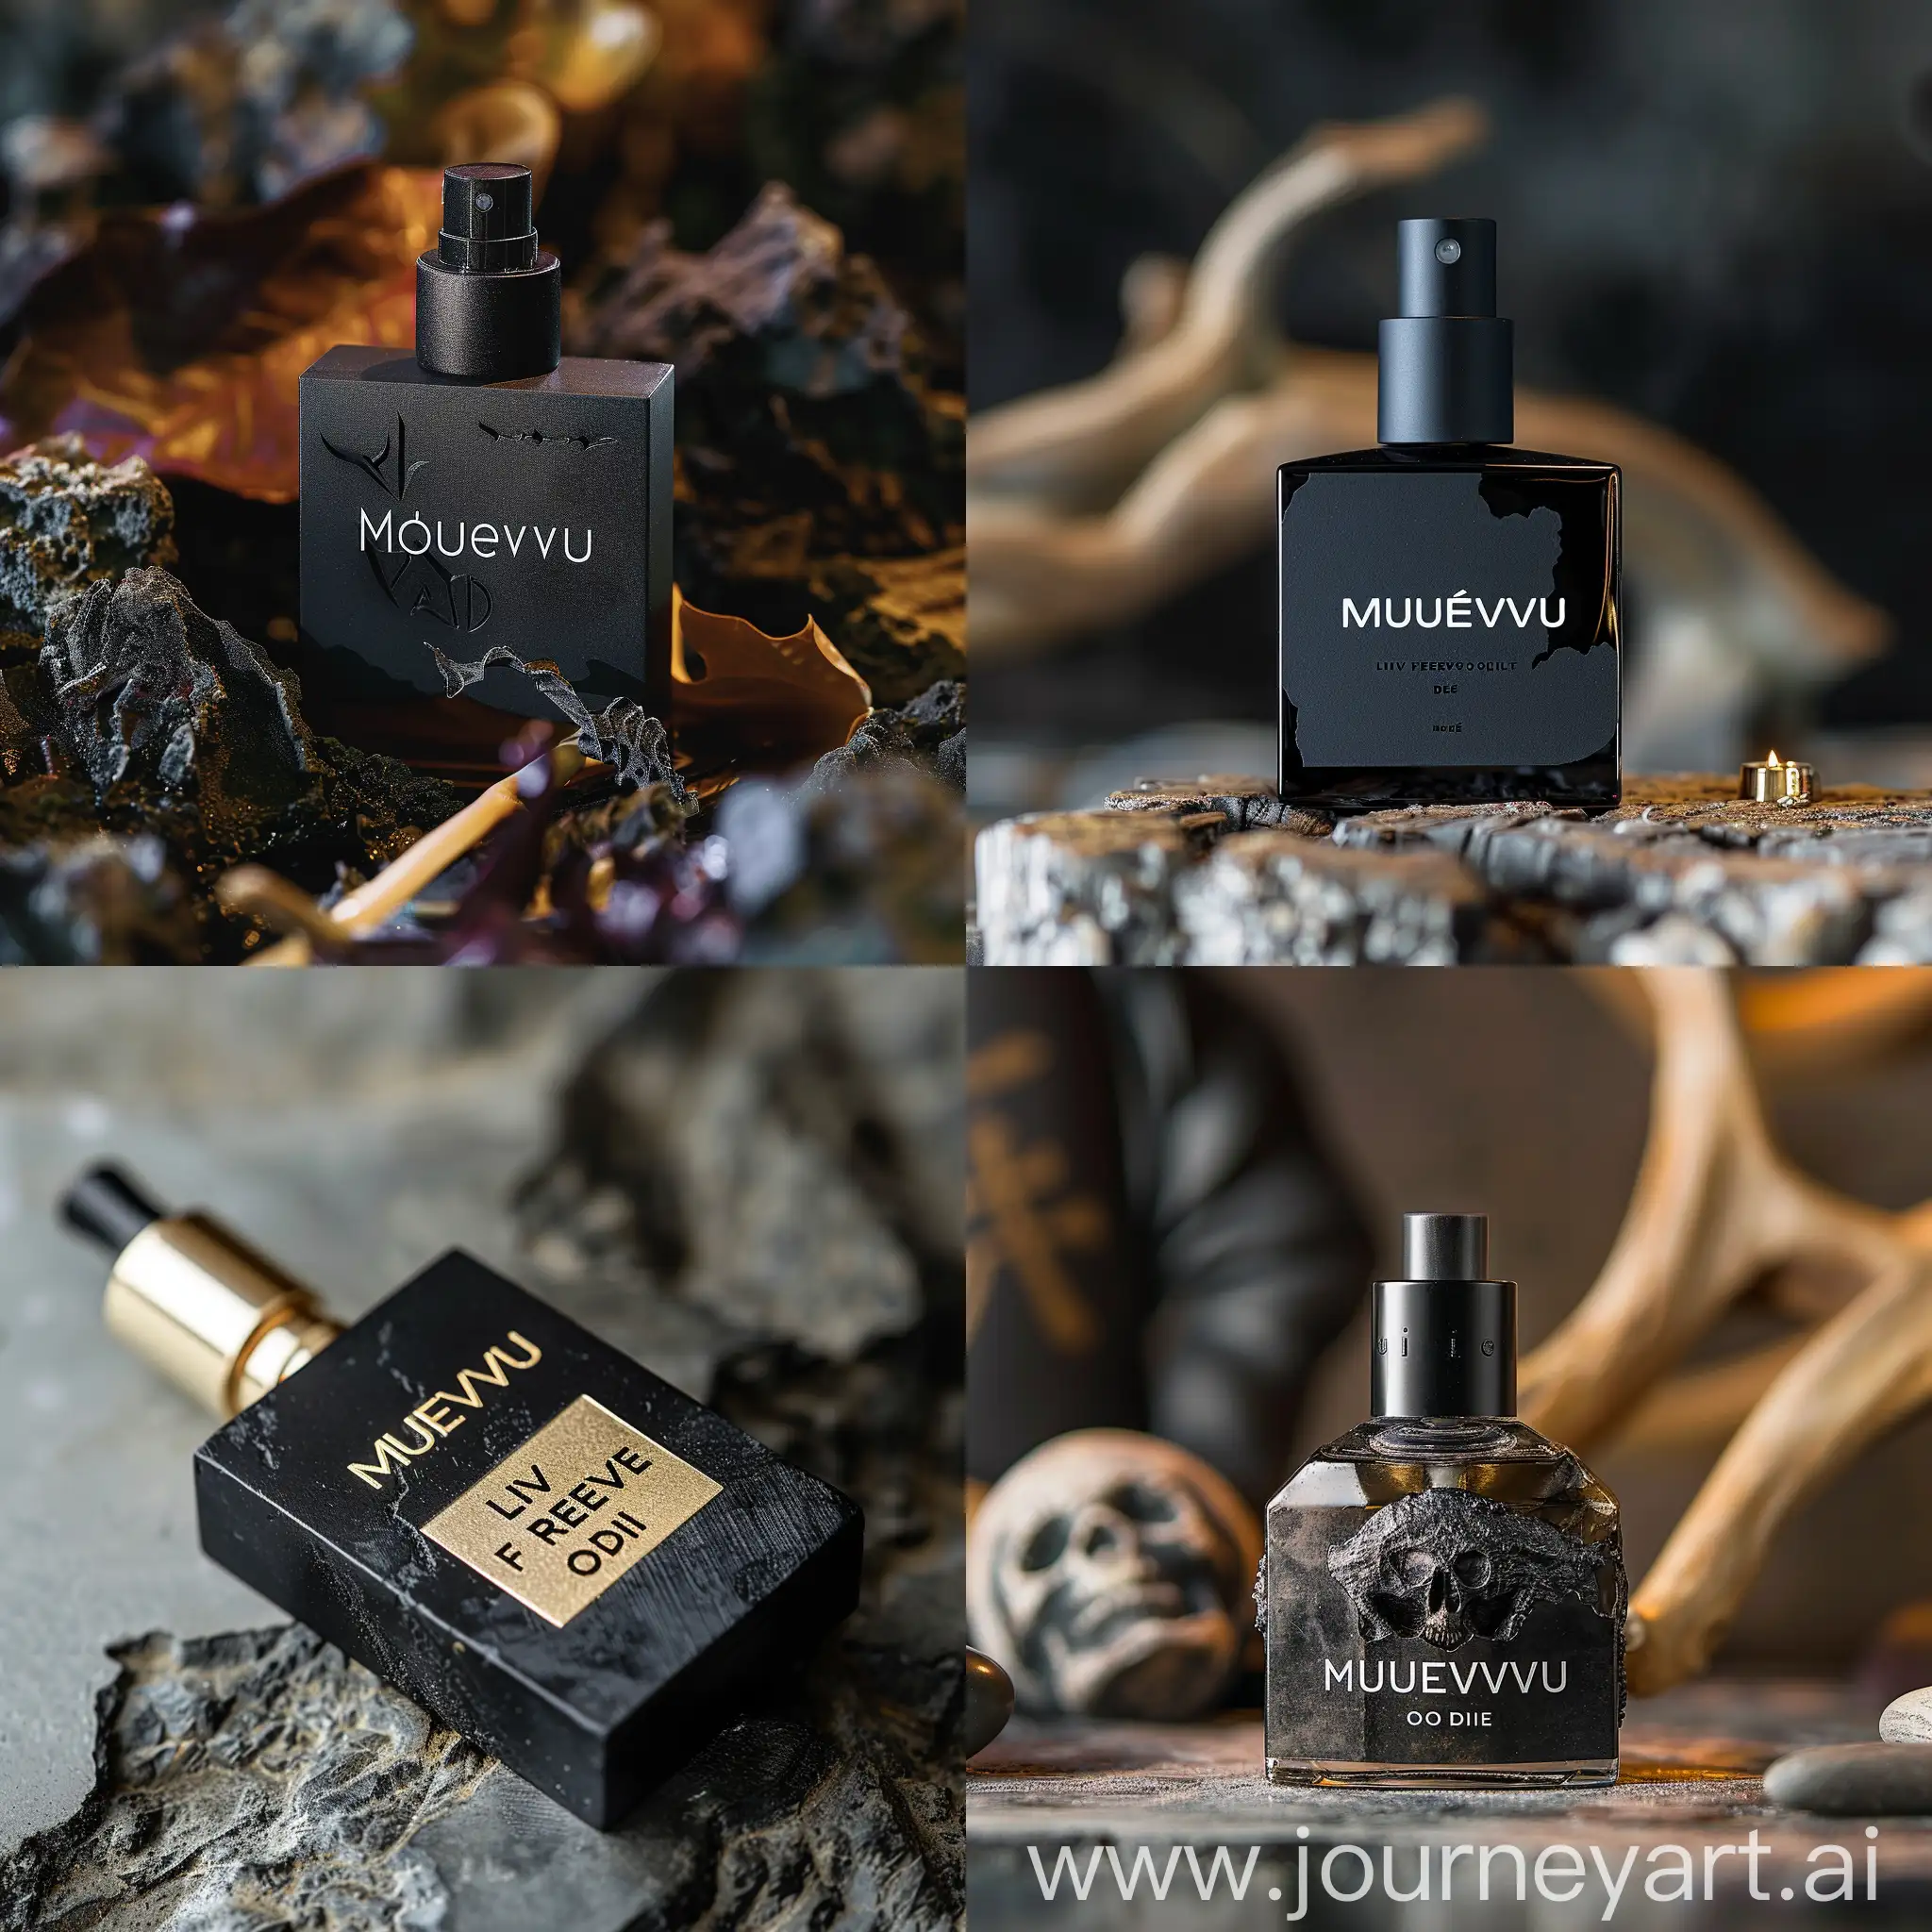 post modern brand with name "Mouevsu" and slogan "Live free or die", it smells same as hard luxe parfume and sounds like a techno, and at this time its all combine expensive and modern look